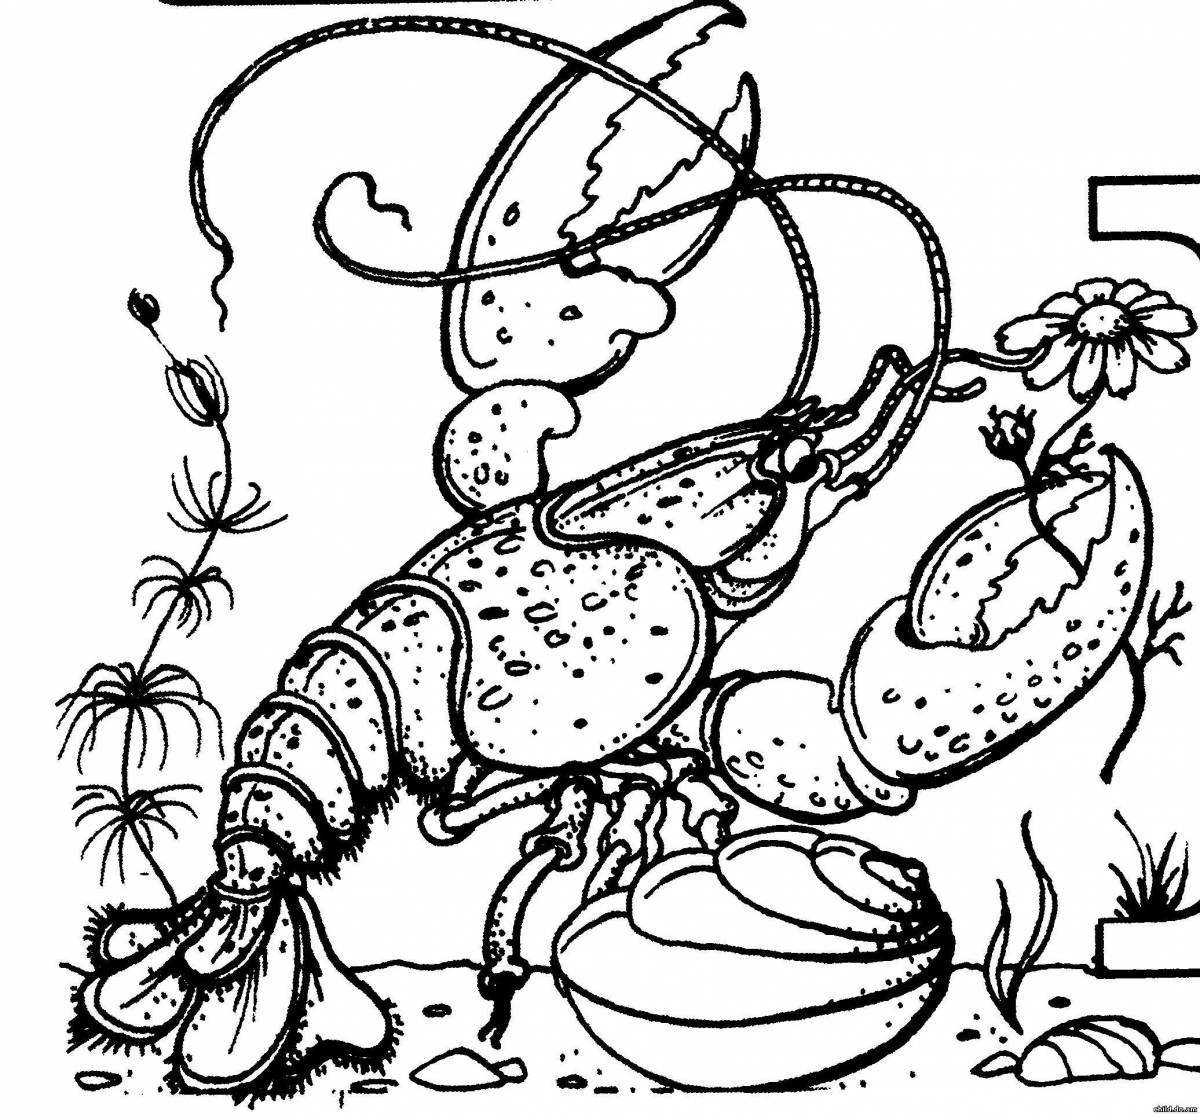 Awesome cancer coloring page